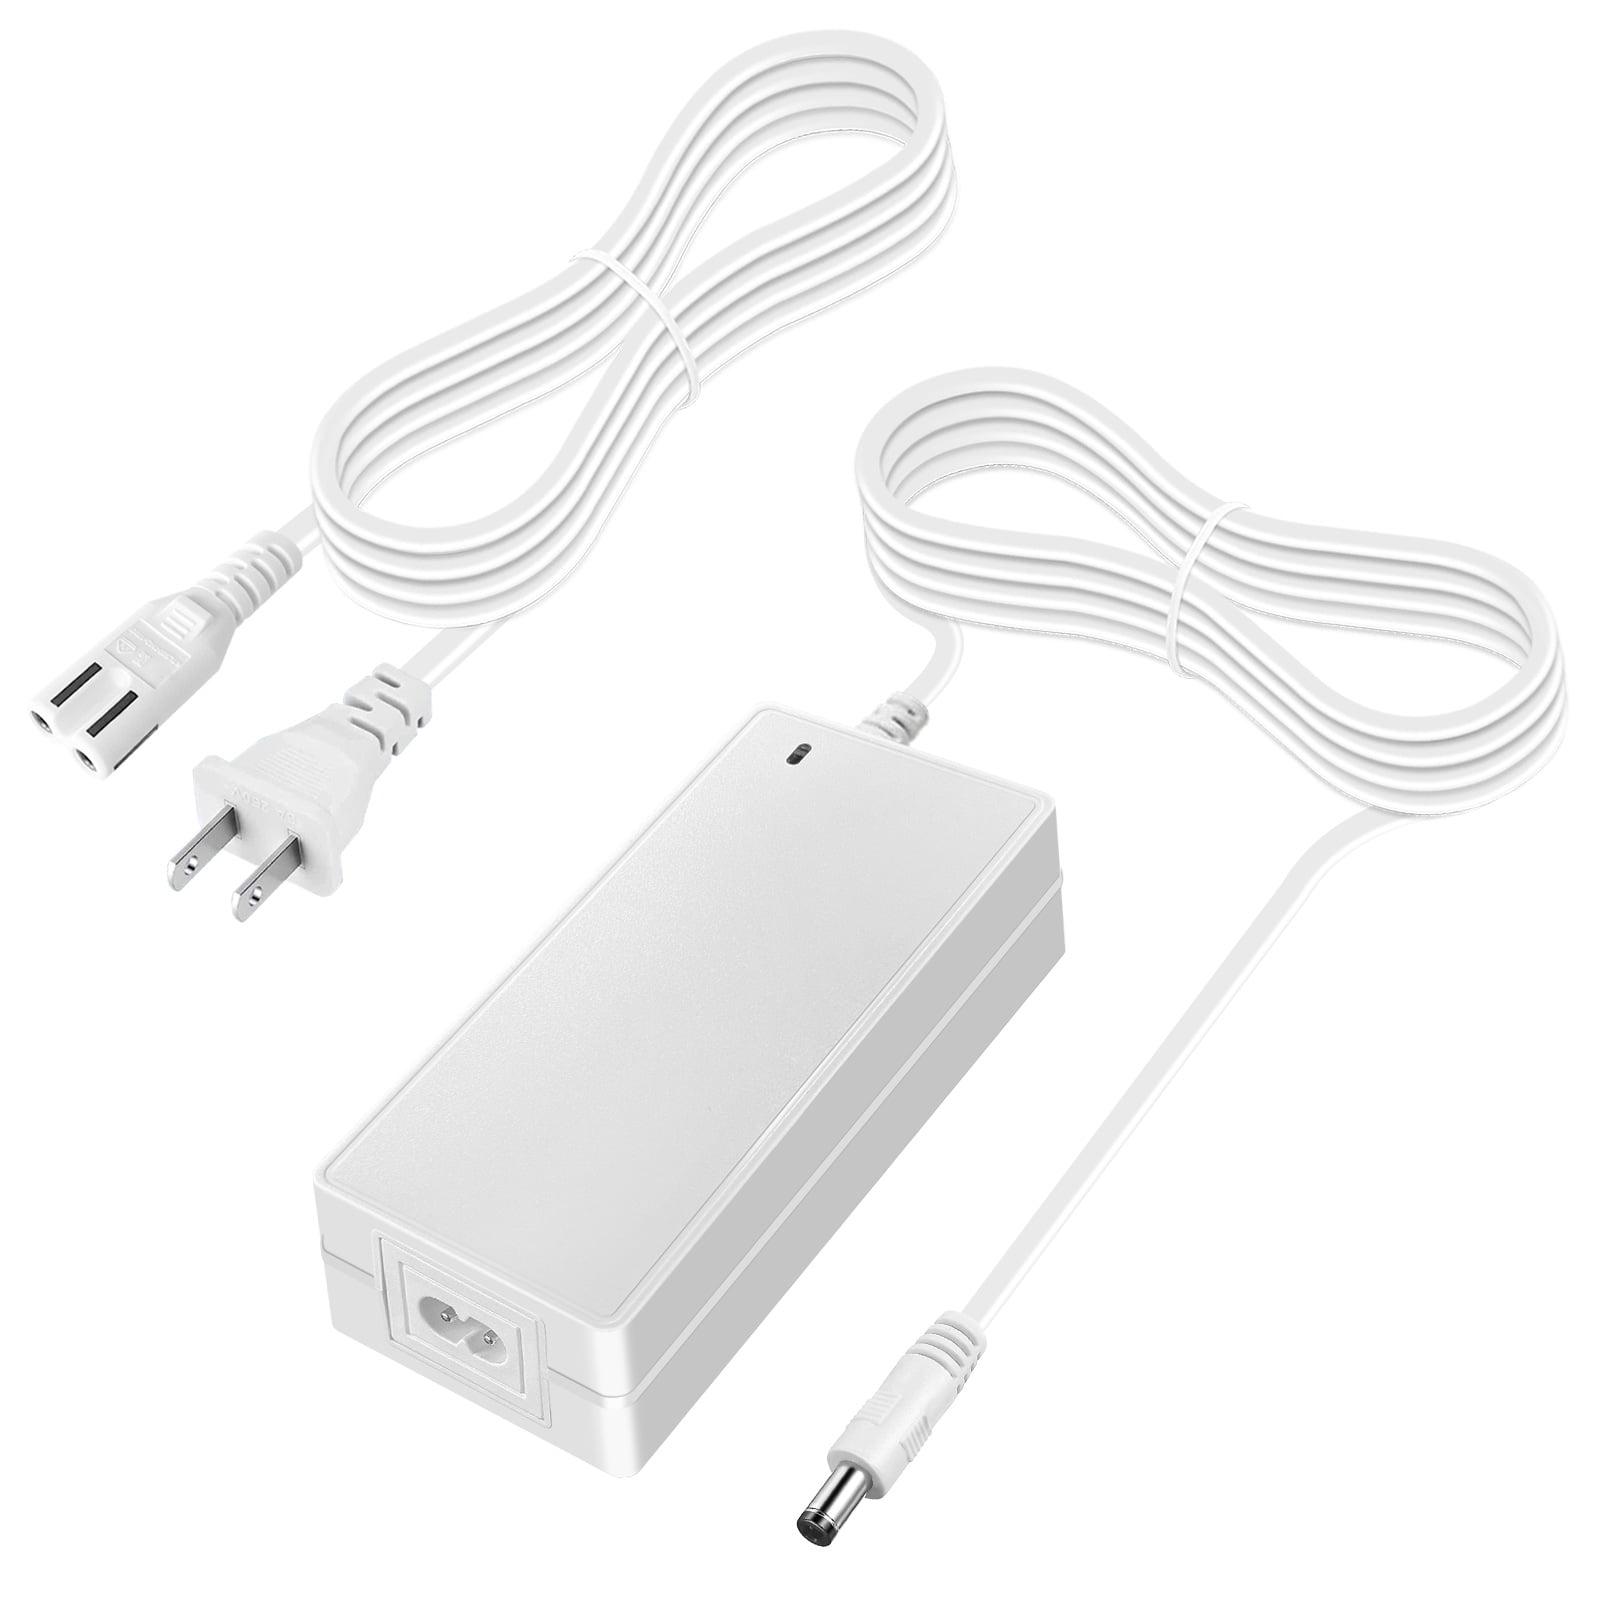 Lost My Charger For Cricut 3 Maker : r/cricut